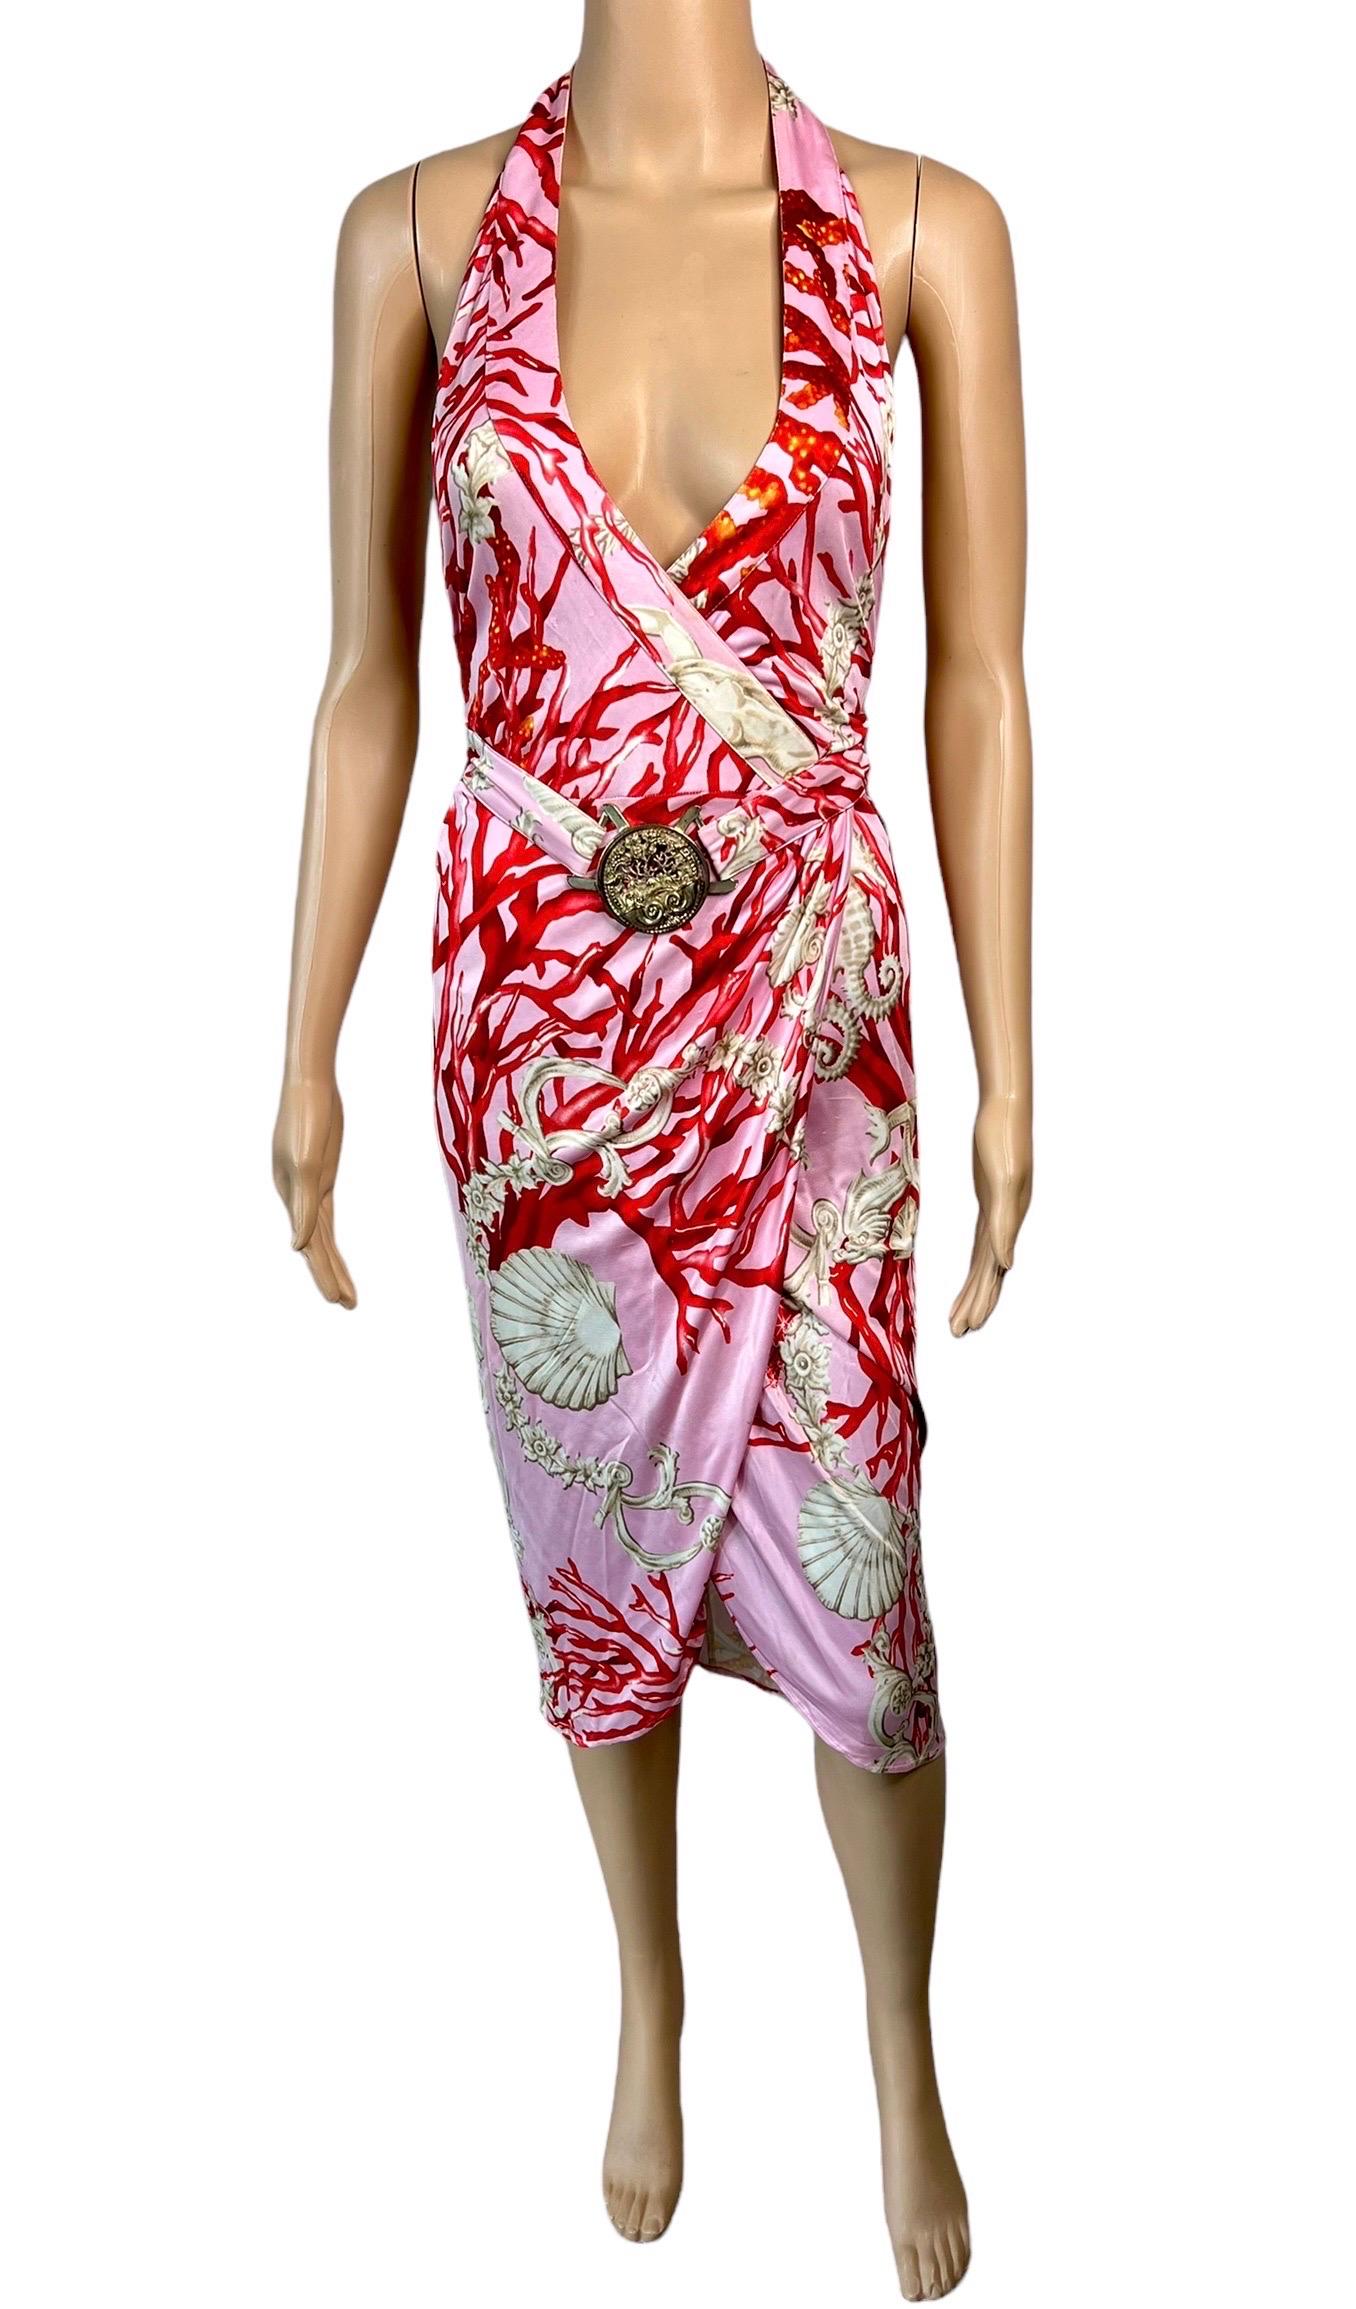 Women's Versace S/S 2005 Plunging Neckline Backless Seashell Print Belted Wrap Dress For Sale